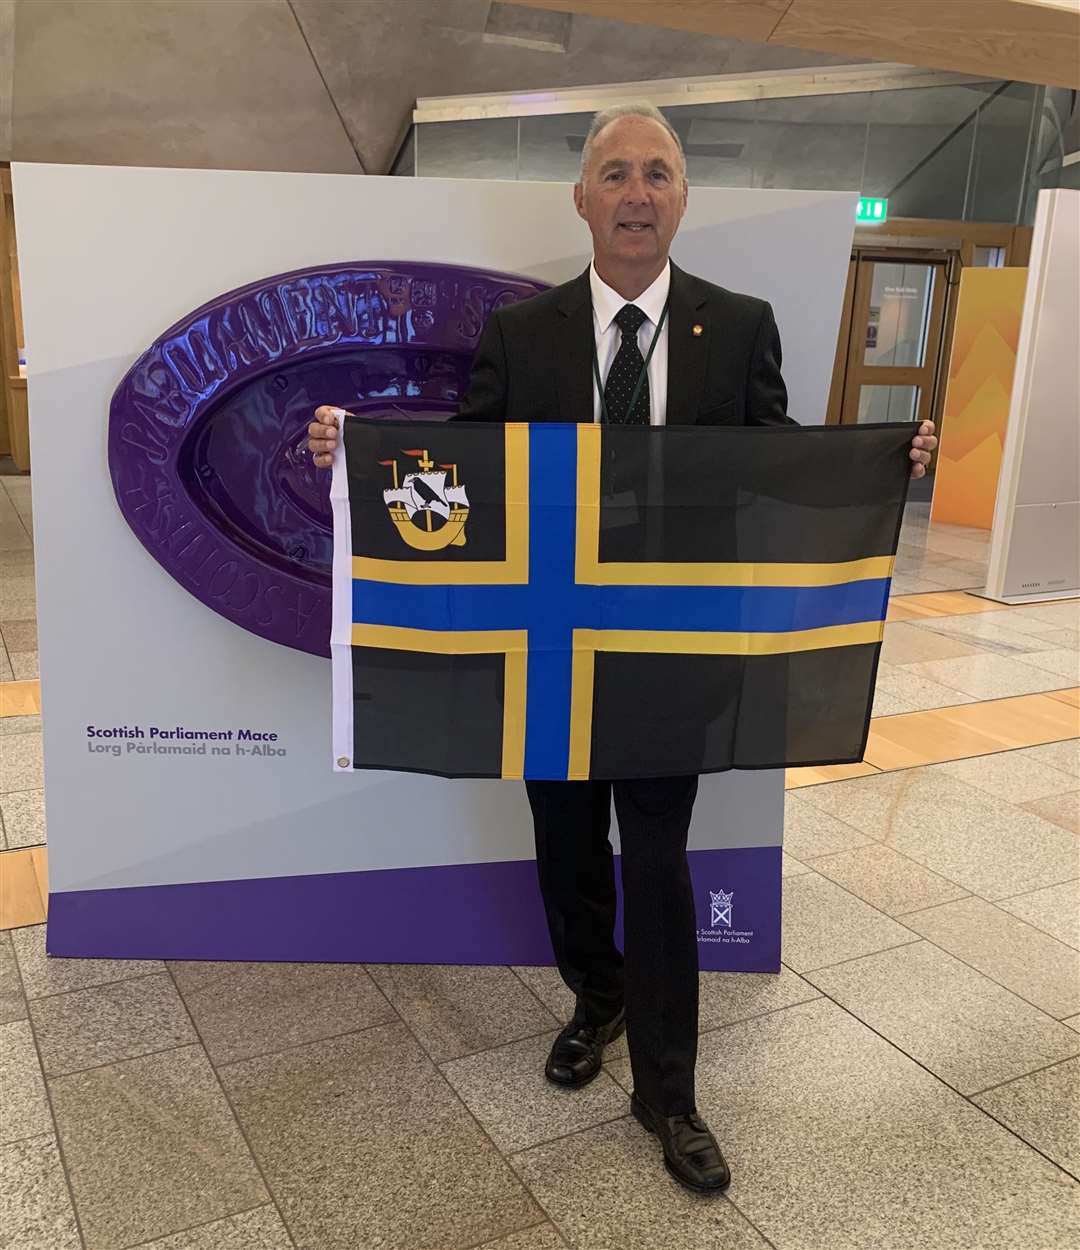 Billy Sinclair with the Caithness flag at the Scottish Parliament